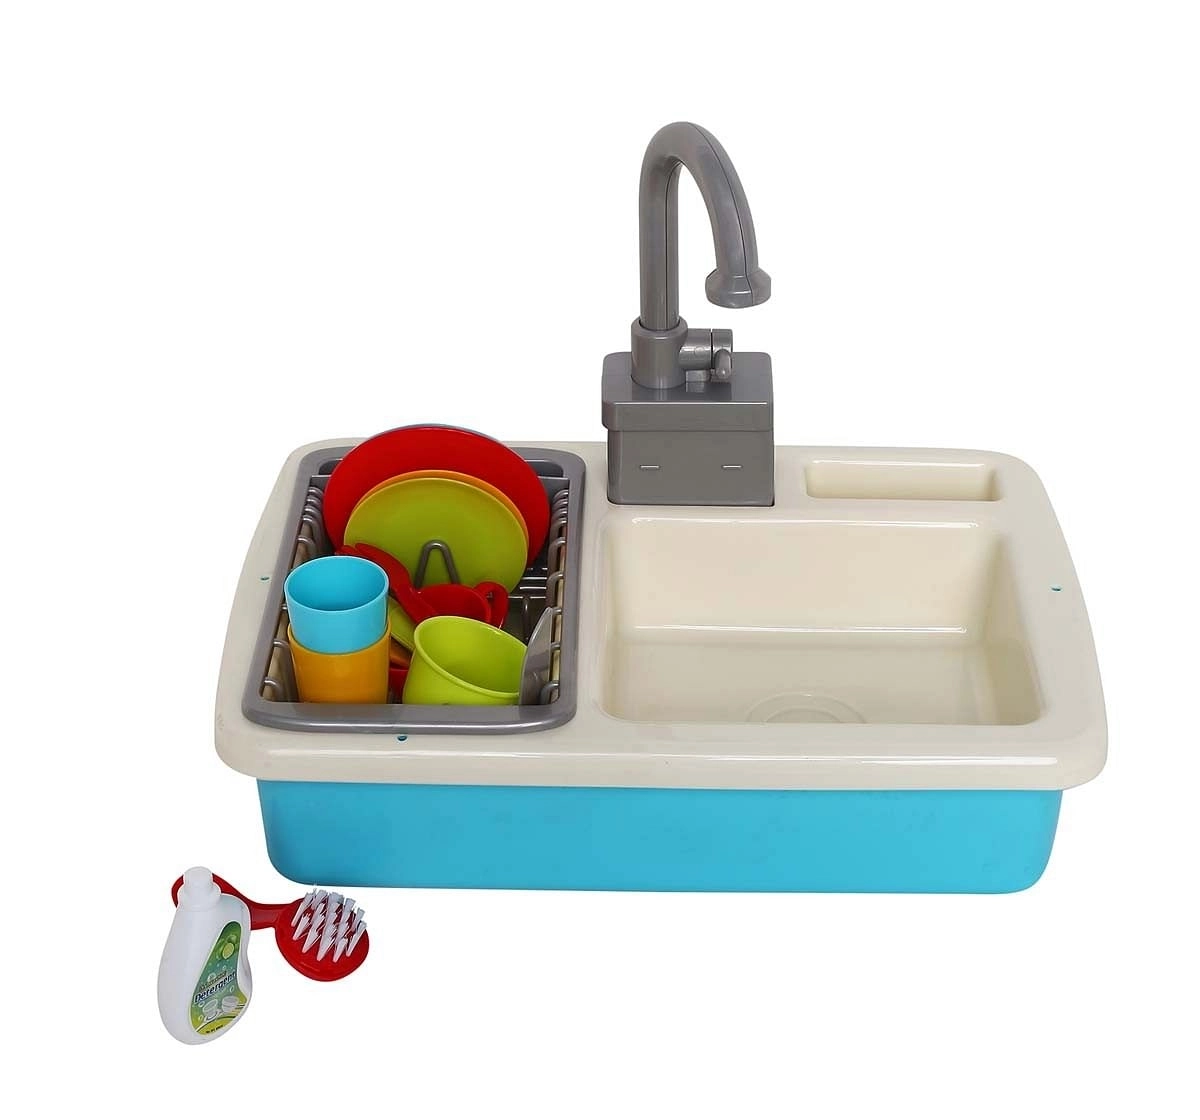 Play Time Blue Kitchen Sink Set & Appliances for age 3Y+ 